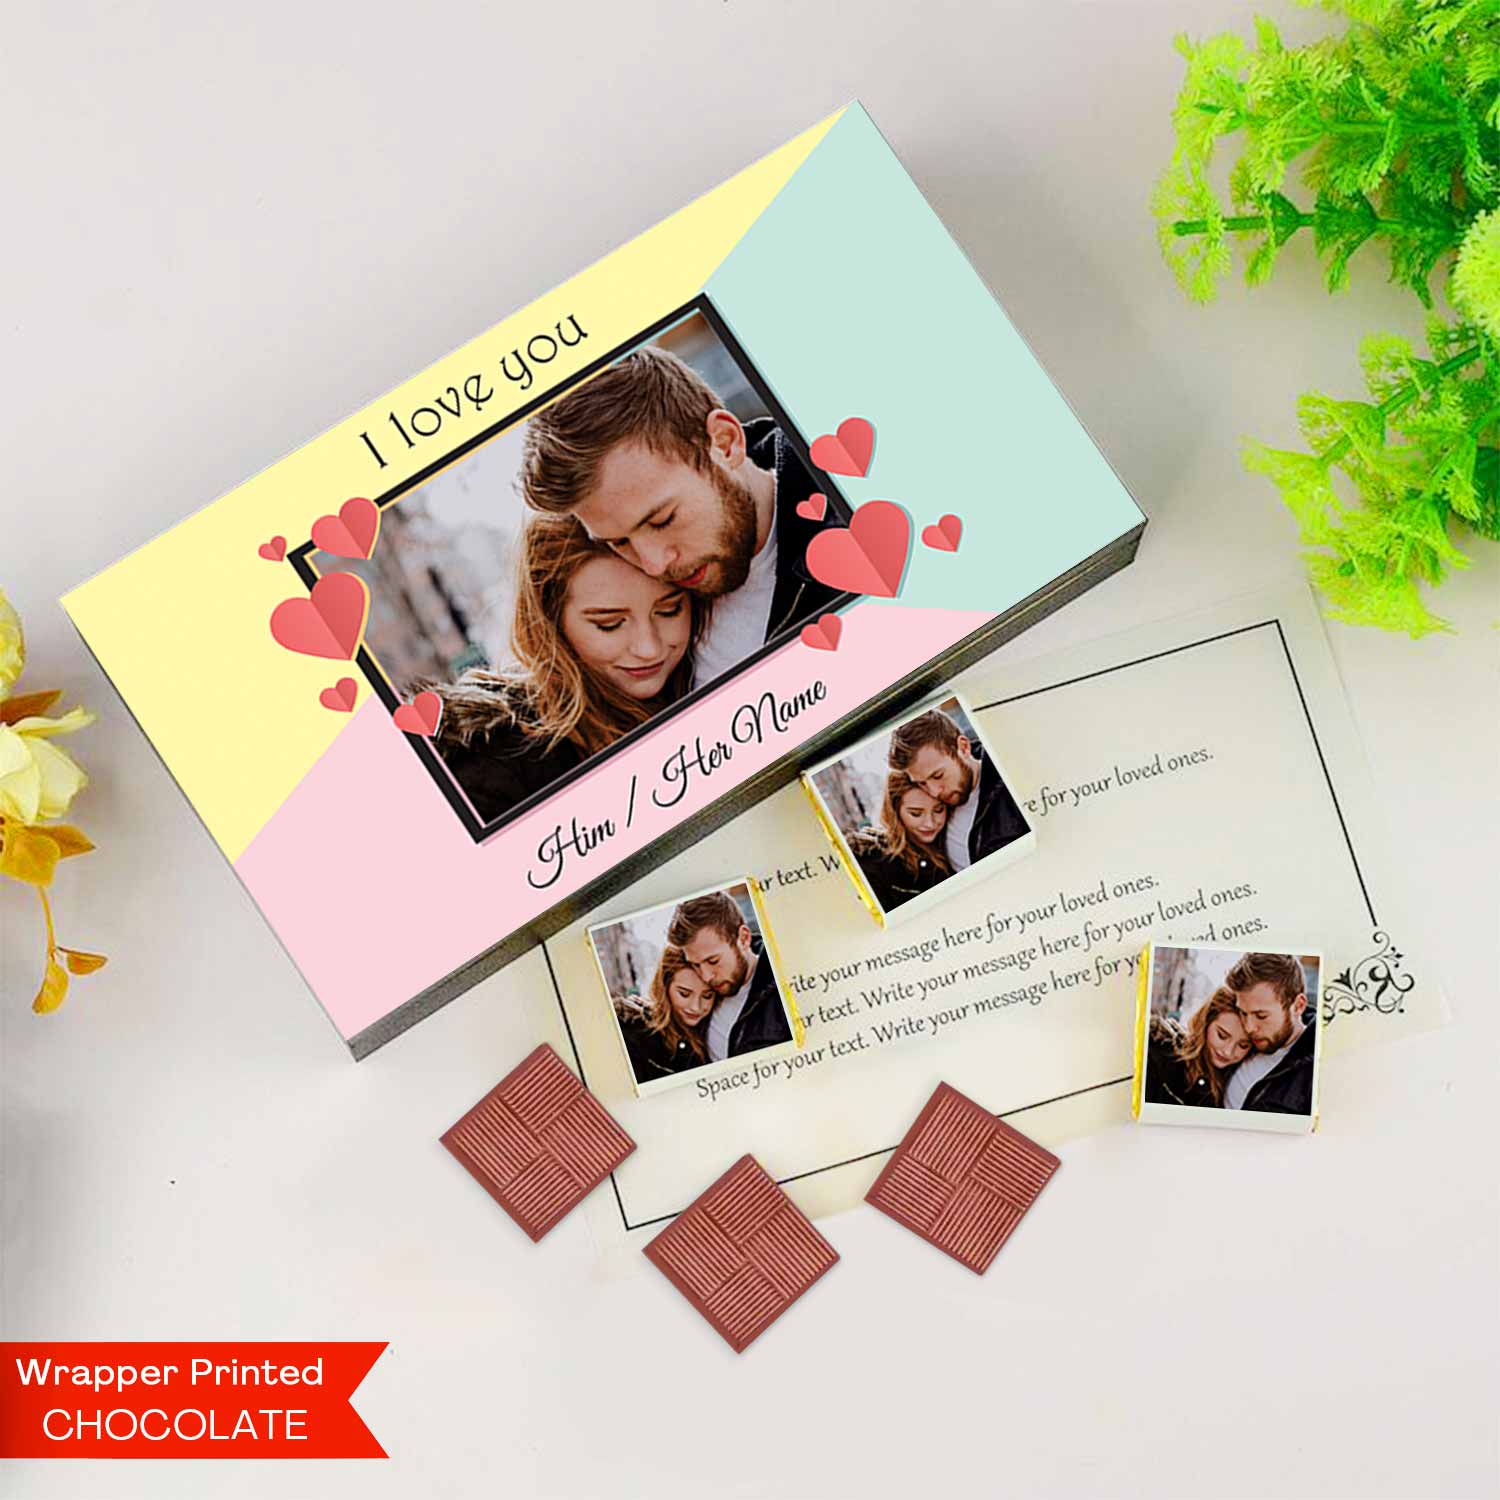 personalised chocolate wrappers near me personalised chocolates with names personalised chocolates with photo customized chocolate chocolate bars chocolates for gift